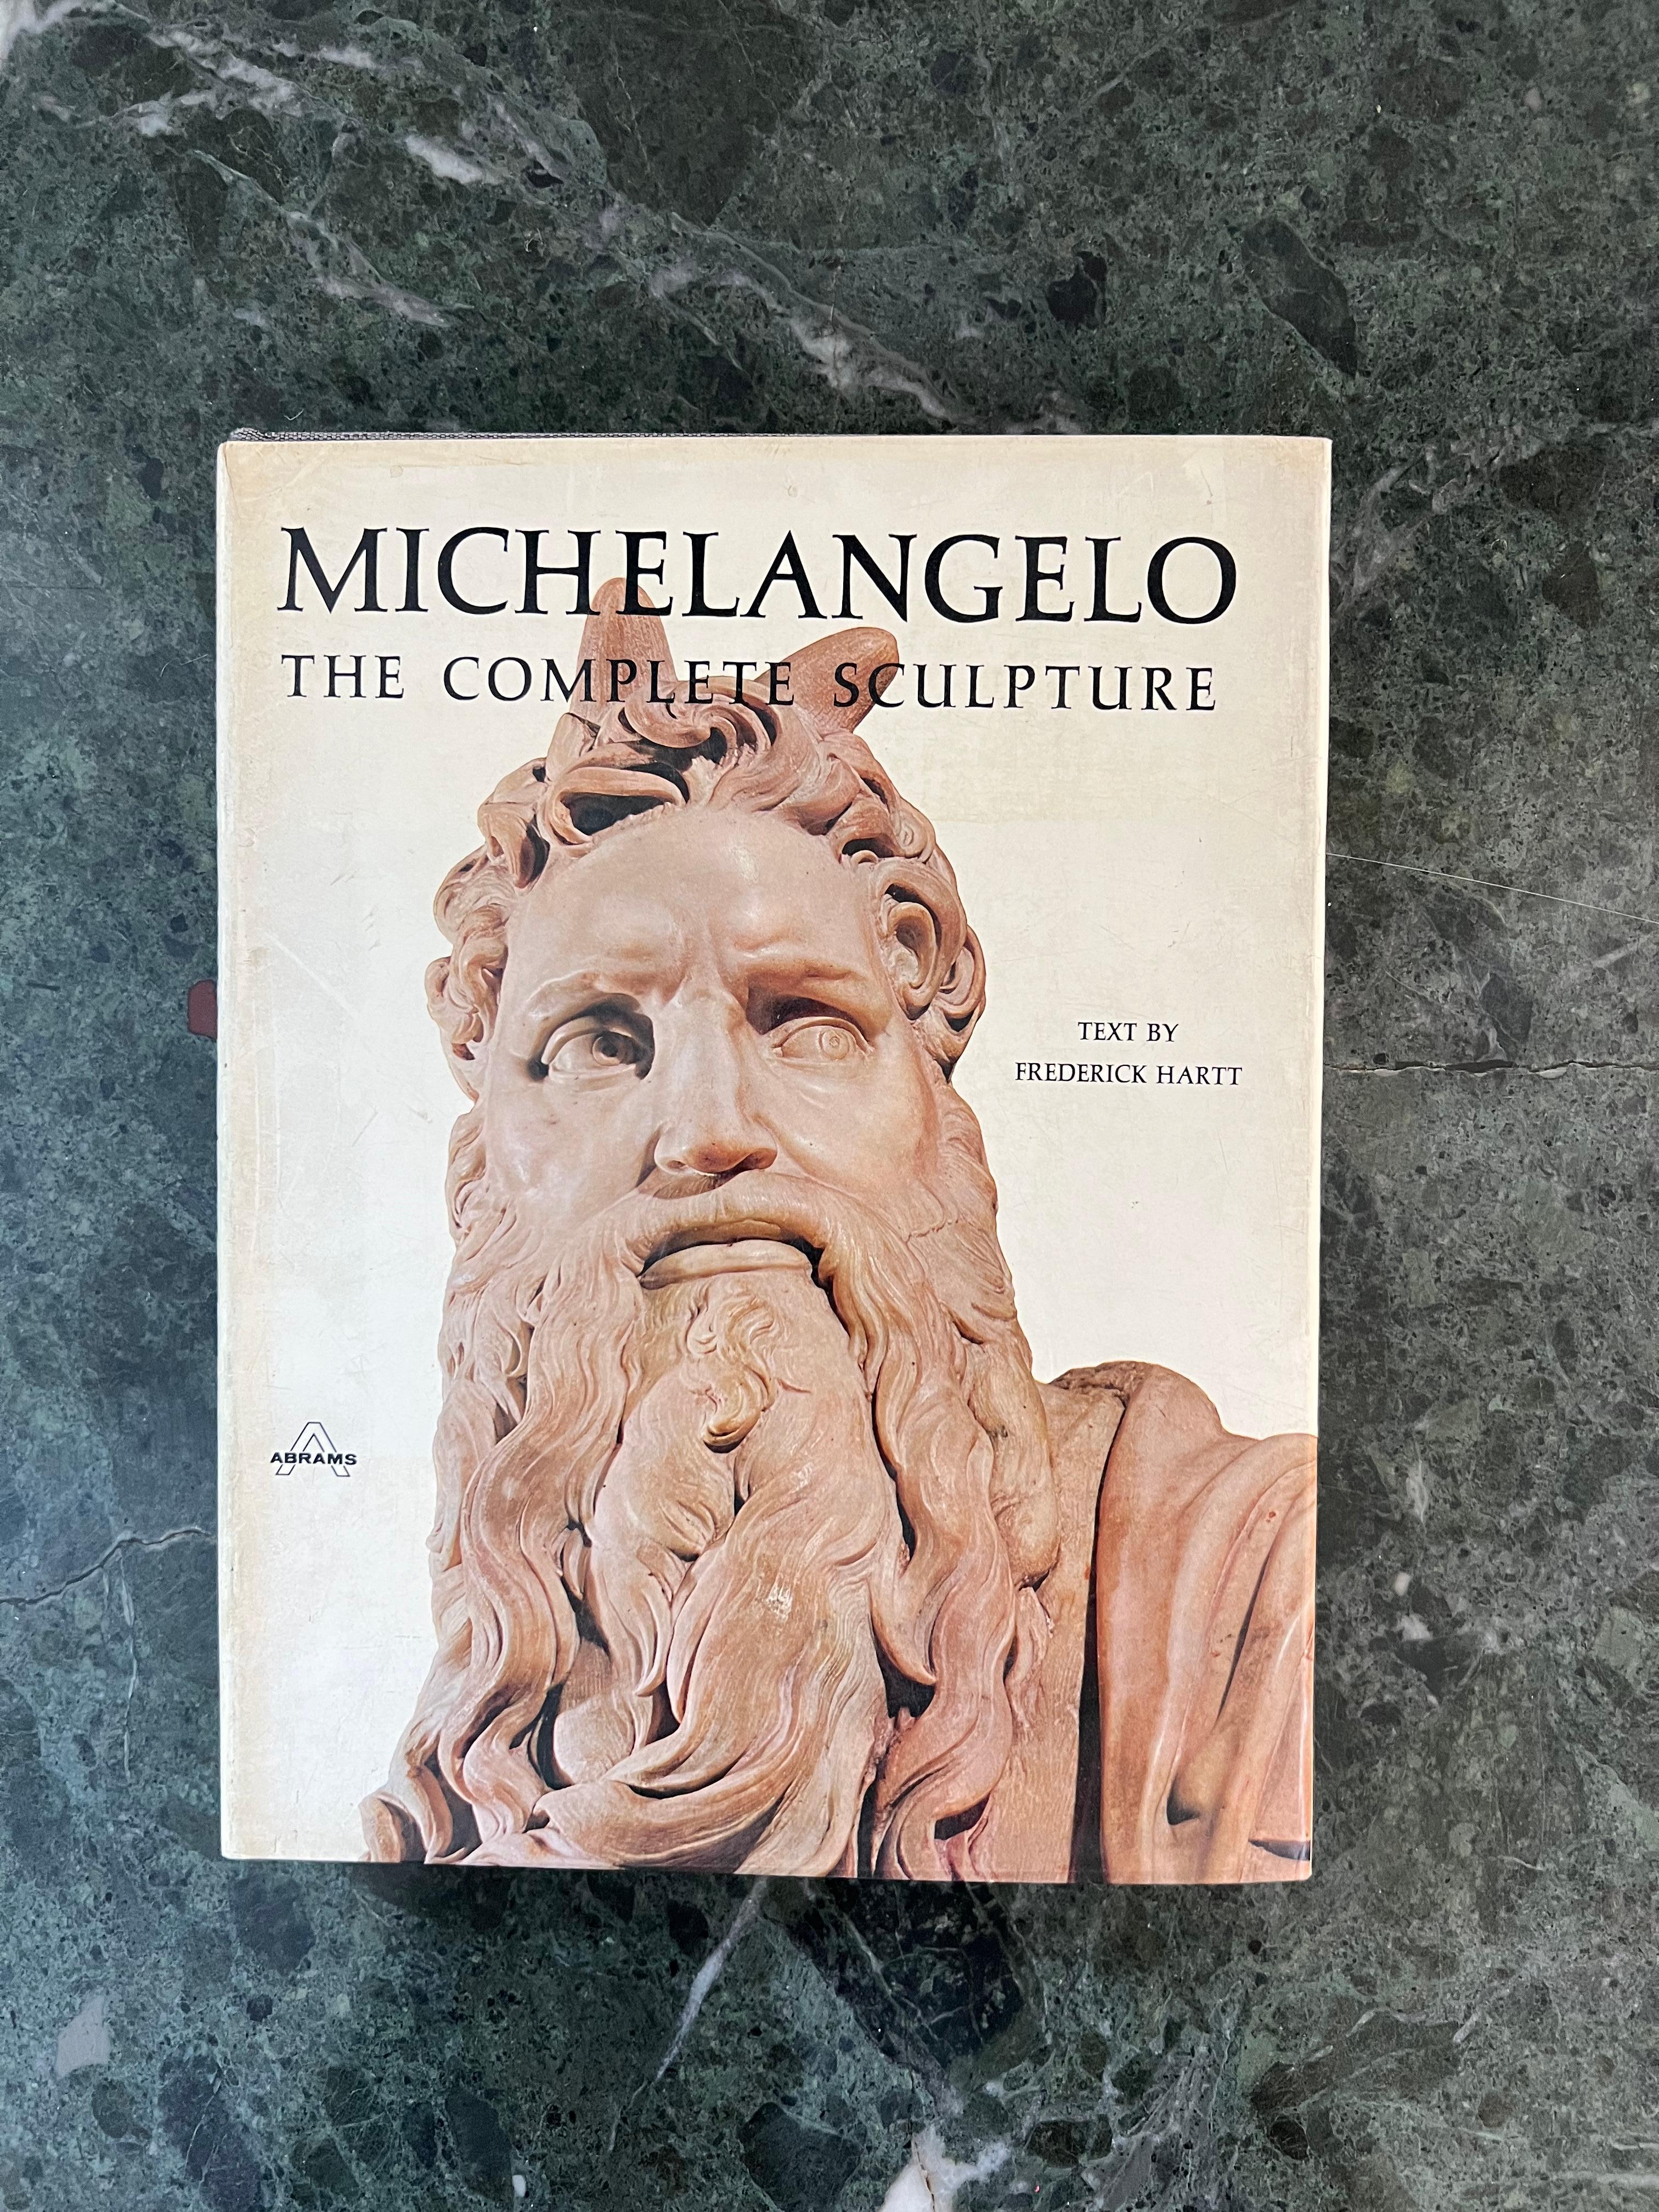 Large Collectible Art Book “Michelangelo: The Complete Sculpture”, 1982 For Sale 9